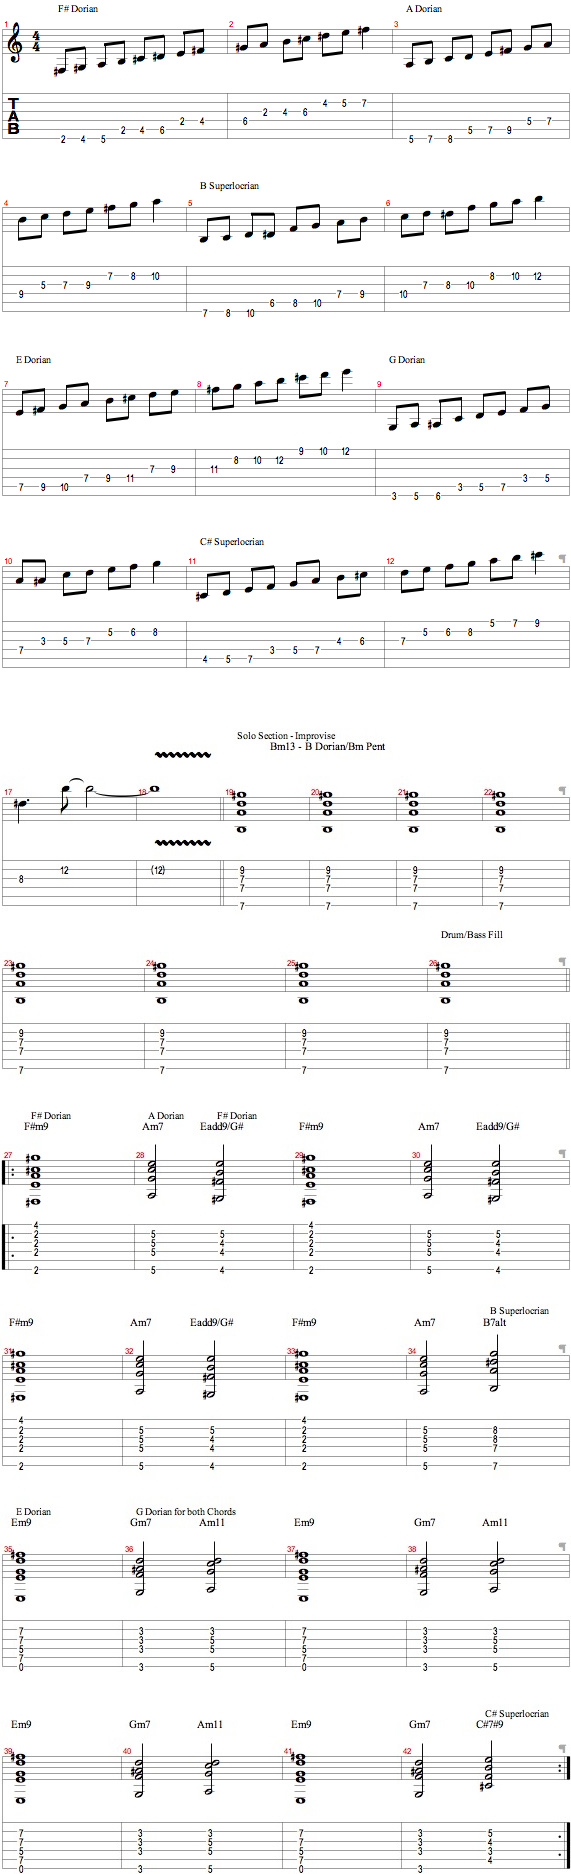 Tablature for Funky Fusion Song - Solo Section